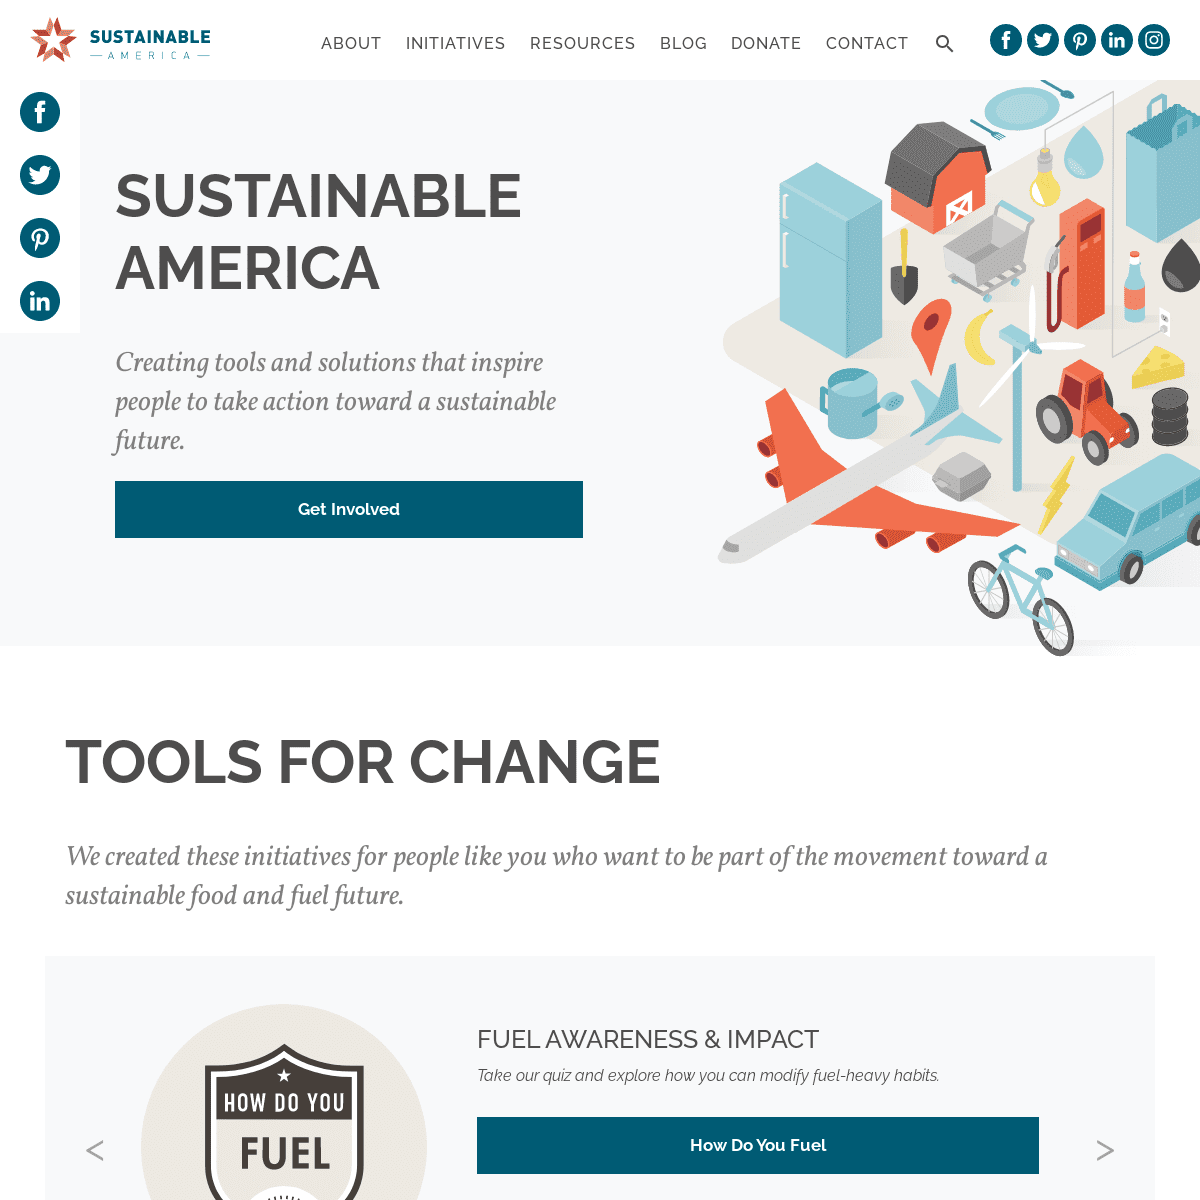 A complete backup of https://sustainableamerica.org